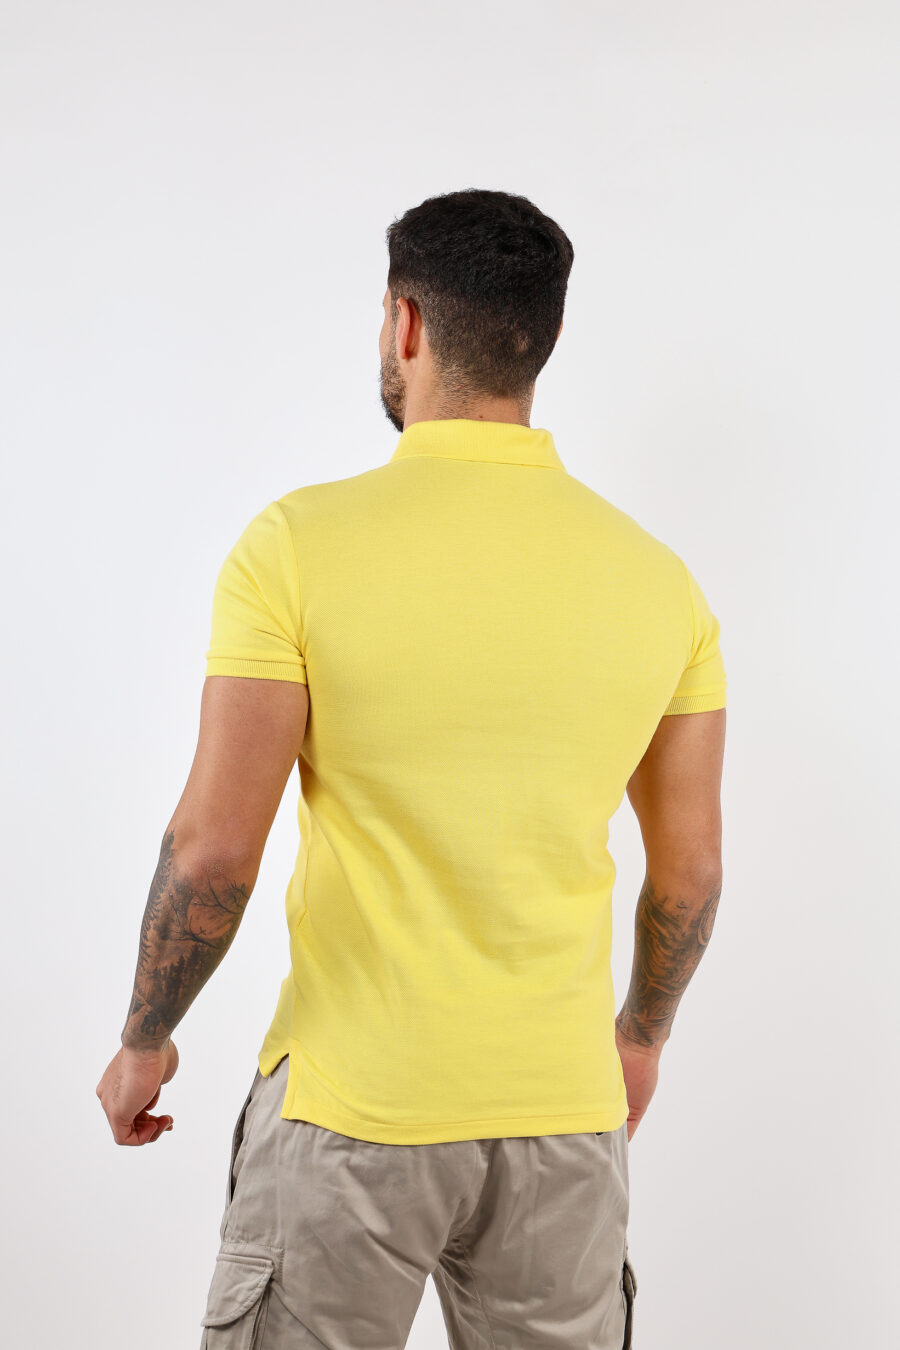 Yellow and blue T-shirt with mini-logo "polo" - BLS Fashion 195